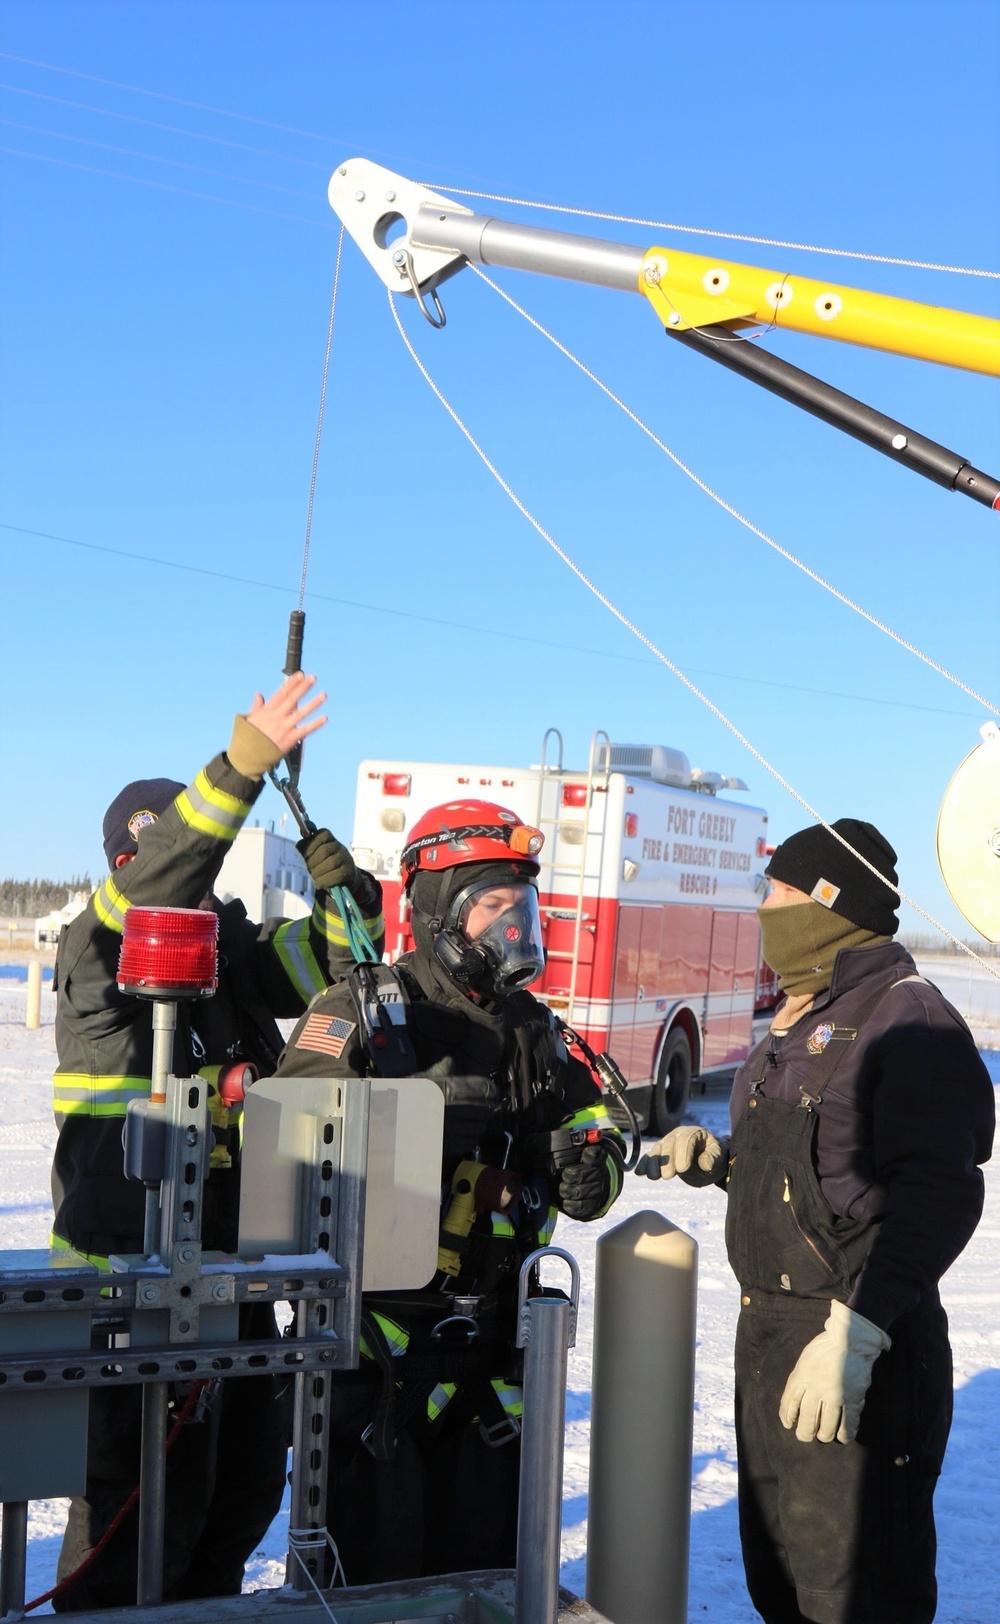 Fort Greely Fire and Emergency Services complete advanced rescue training